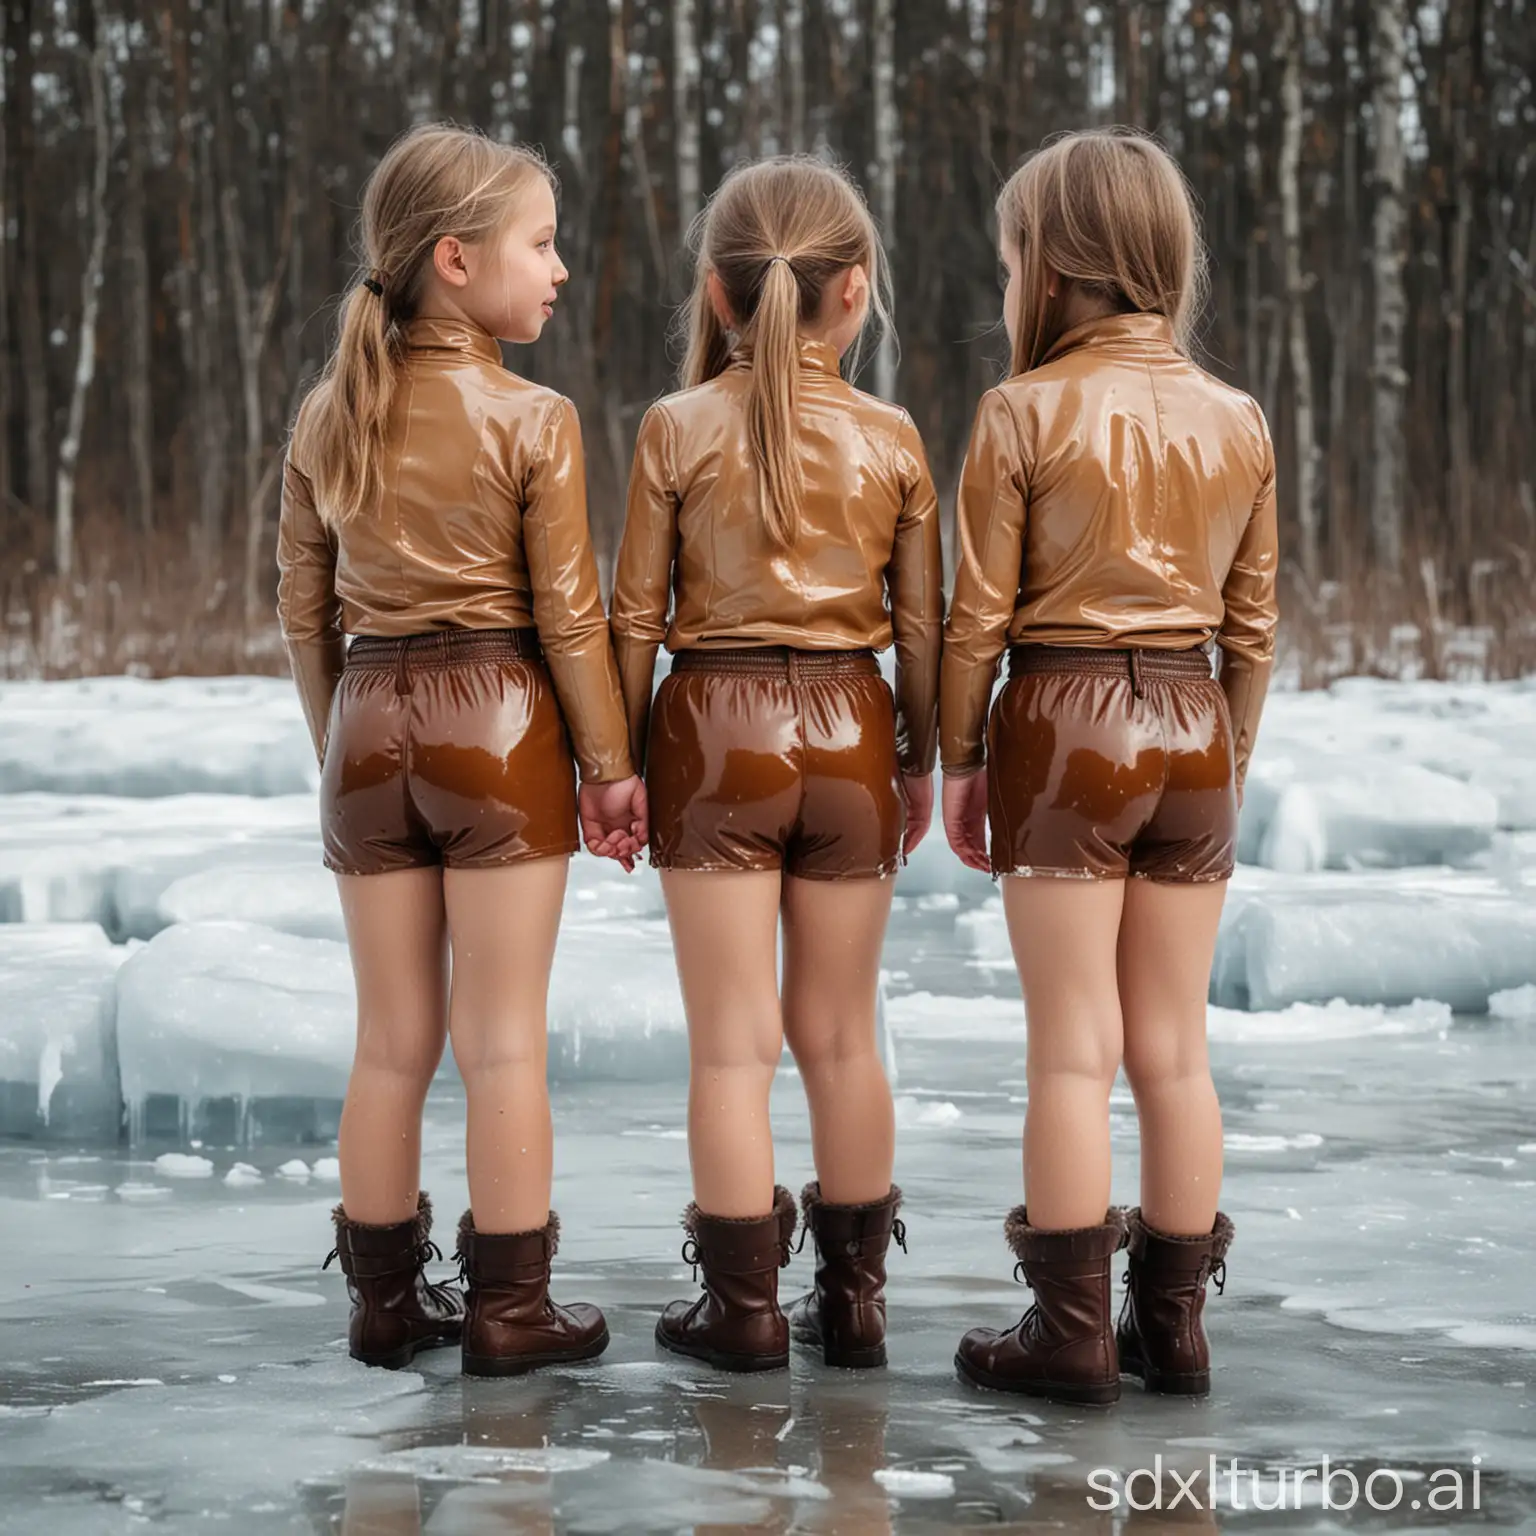 children girls in very tight brown latex shorts  back frozen in a block of ice